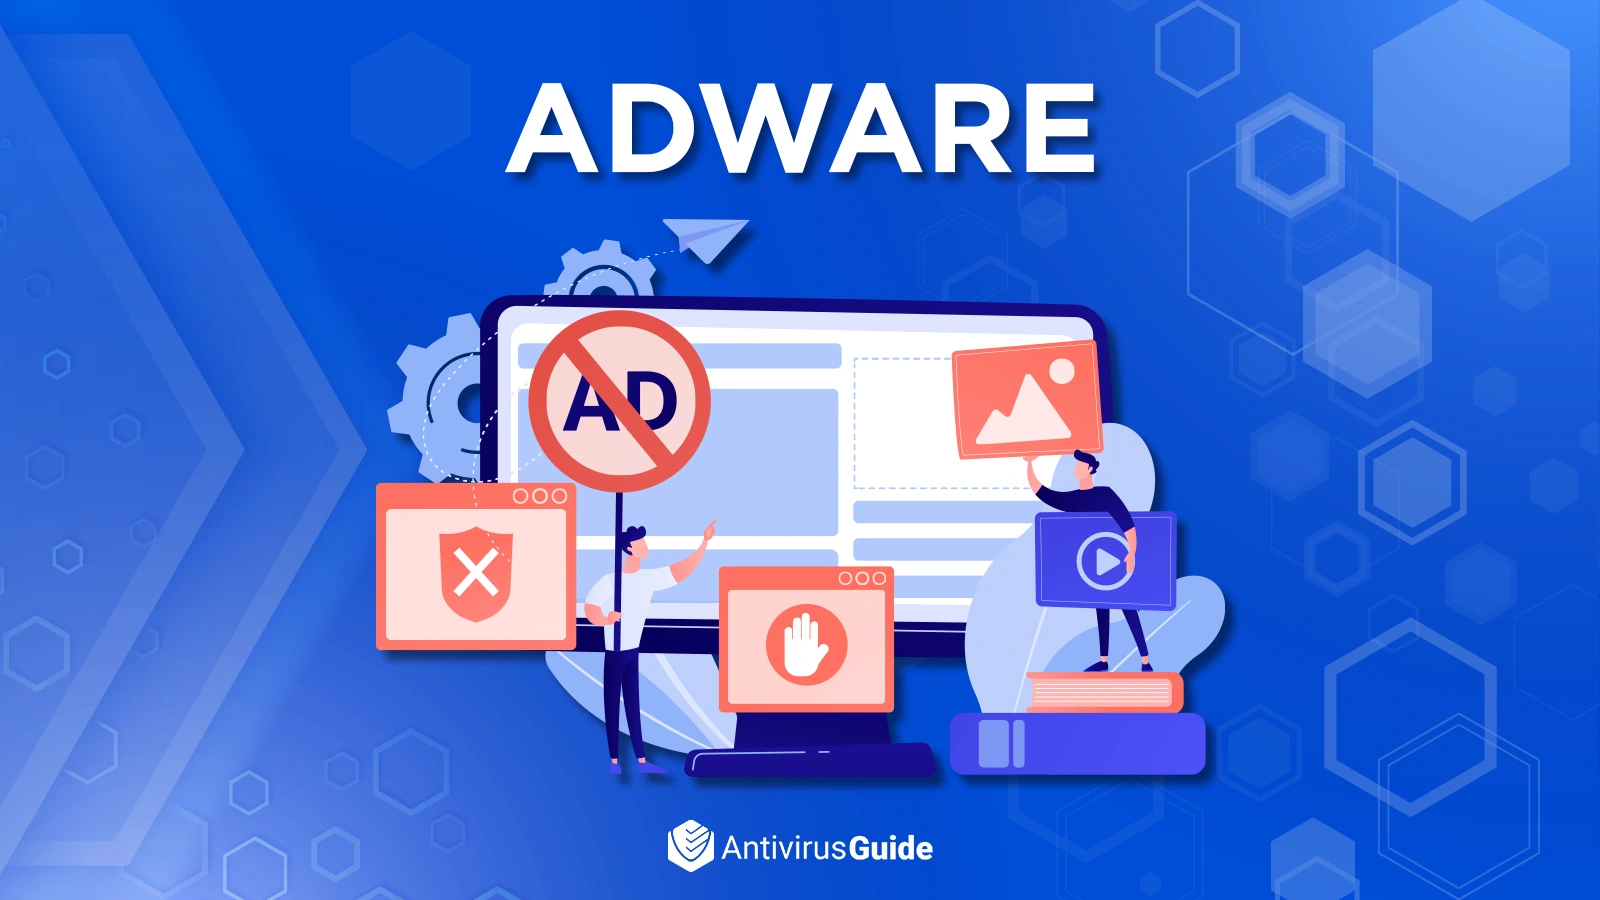 What Is Adware and How Do I Remove It?